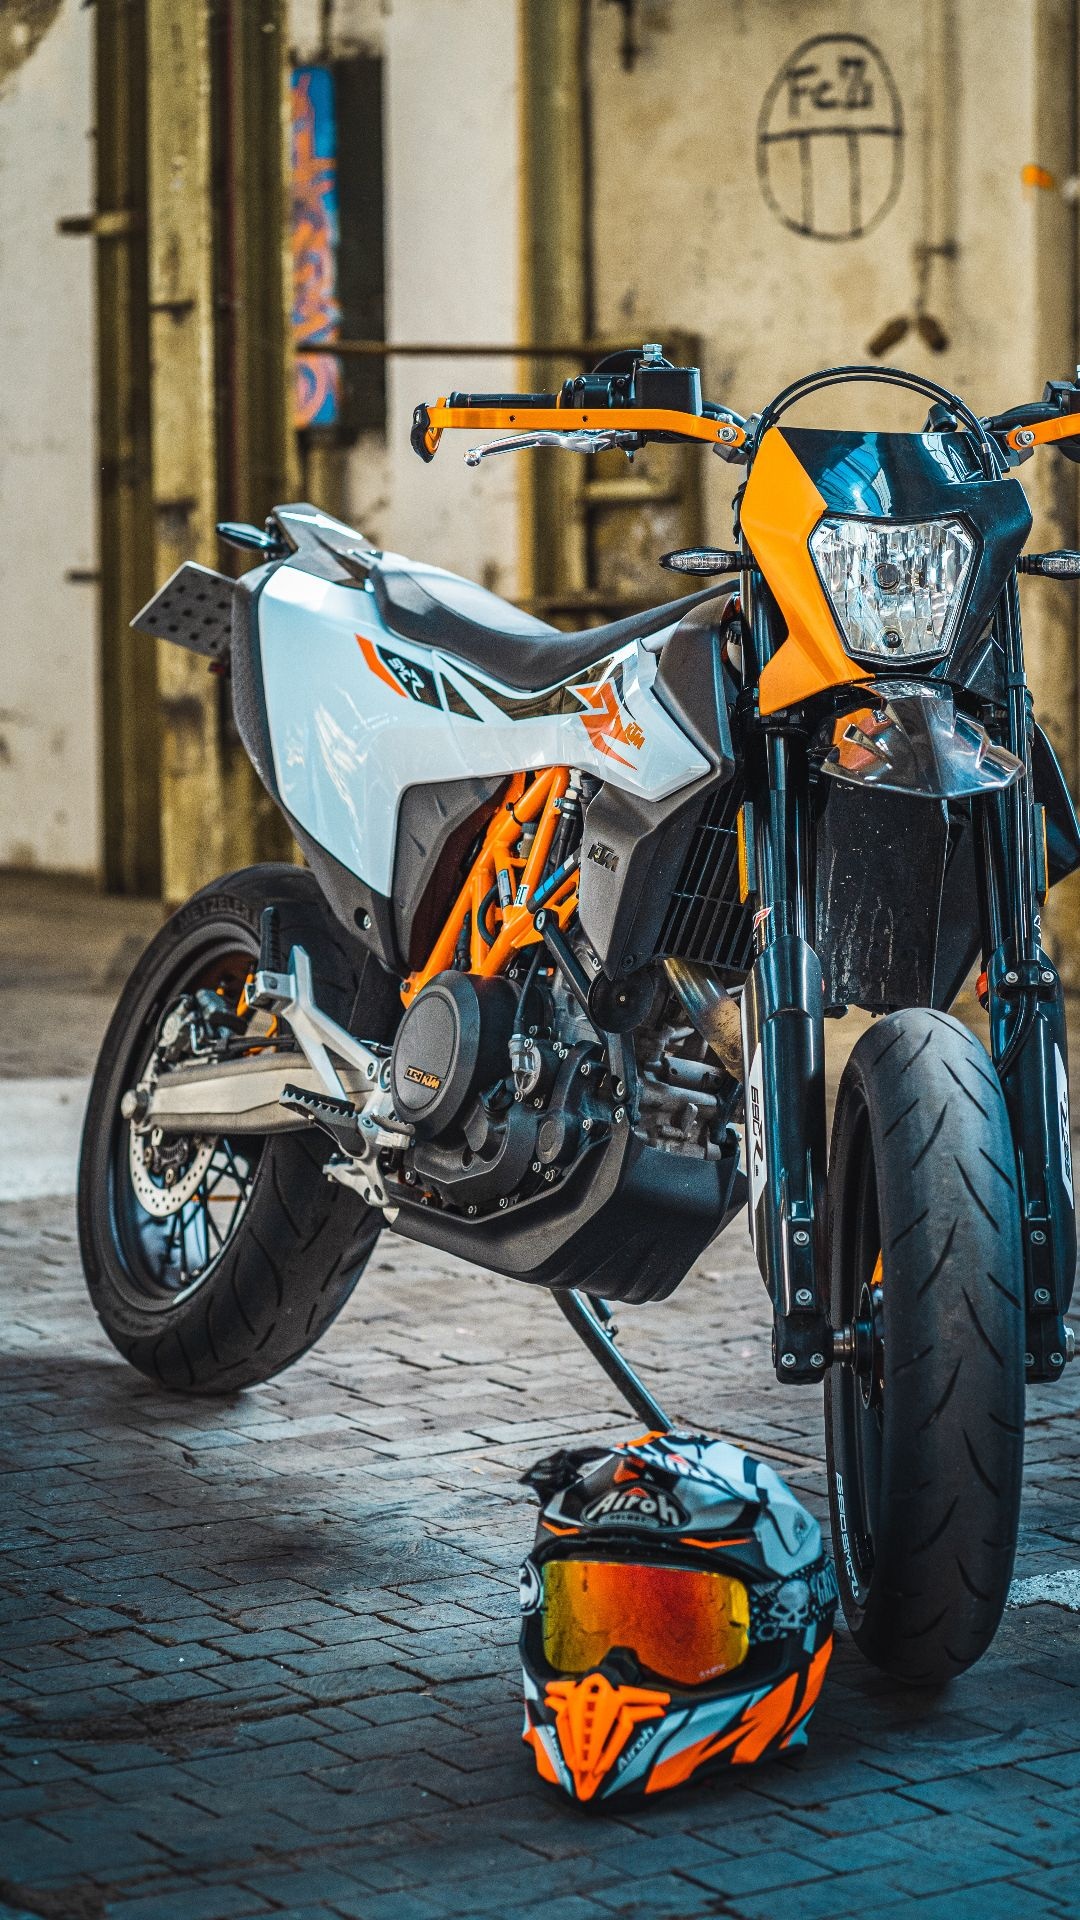 KTM 690 SMC, High-quality wallpapers, Backgrounds gallery, Motorcycle enthusiasts, 1080x1920 Full HD Handy